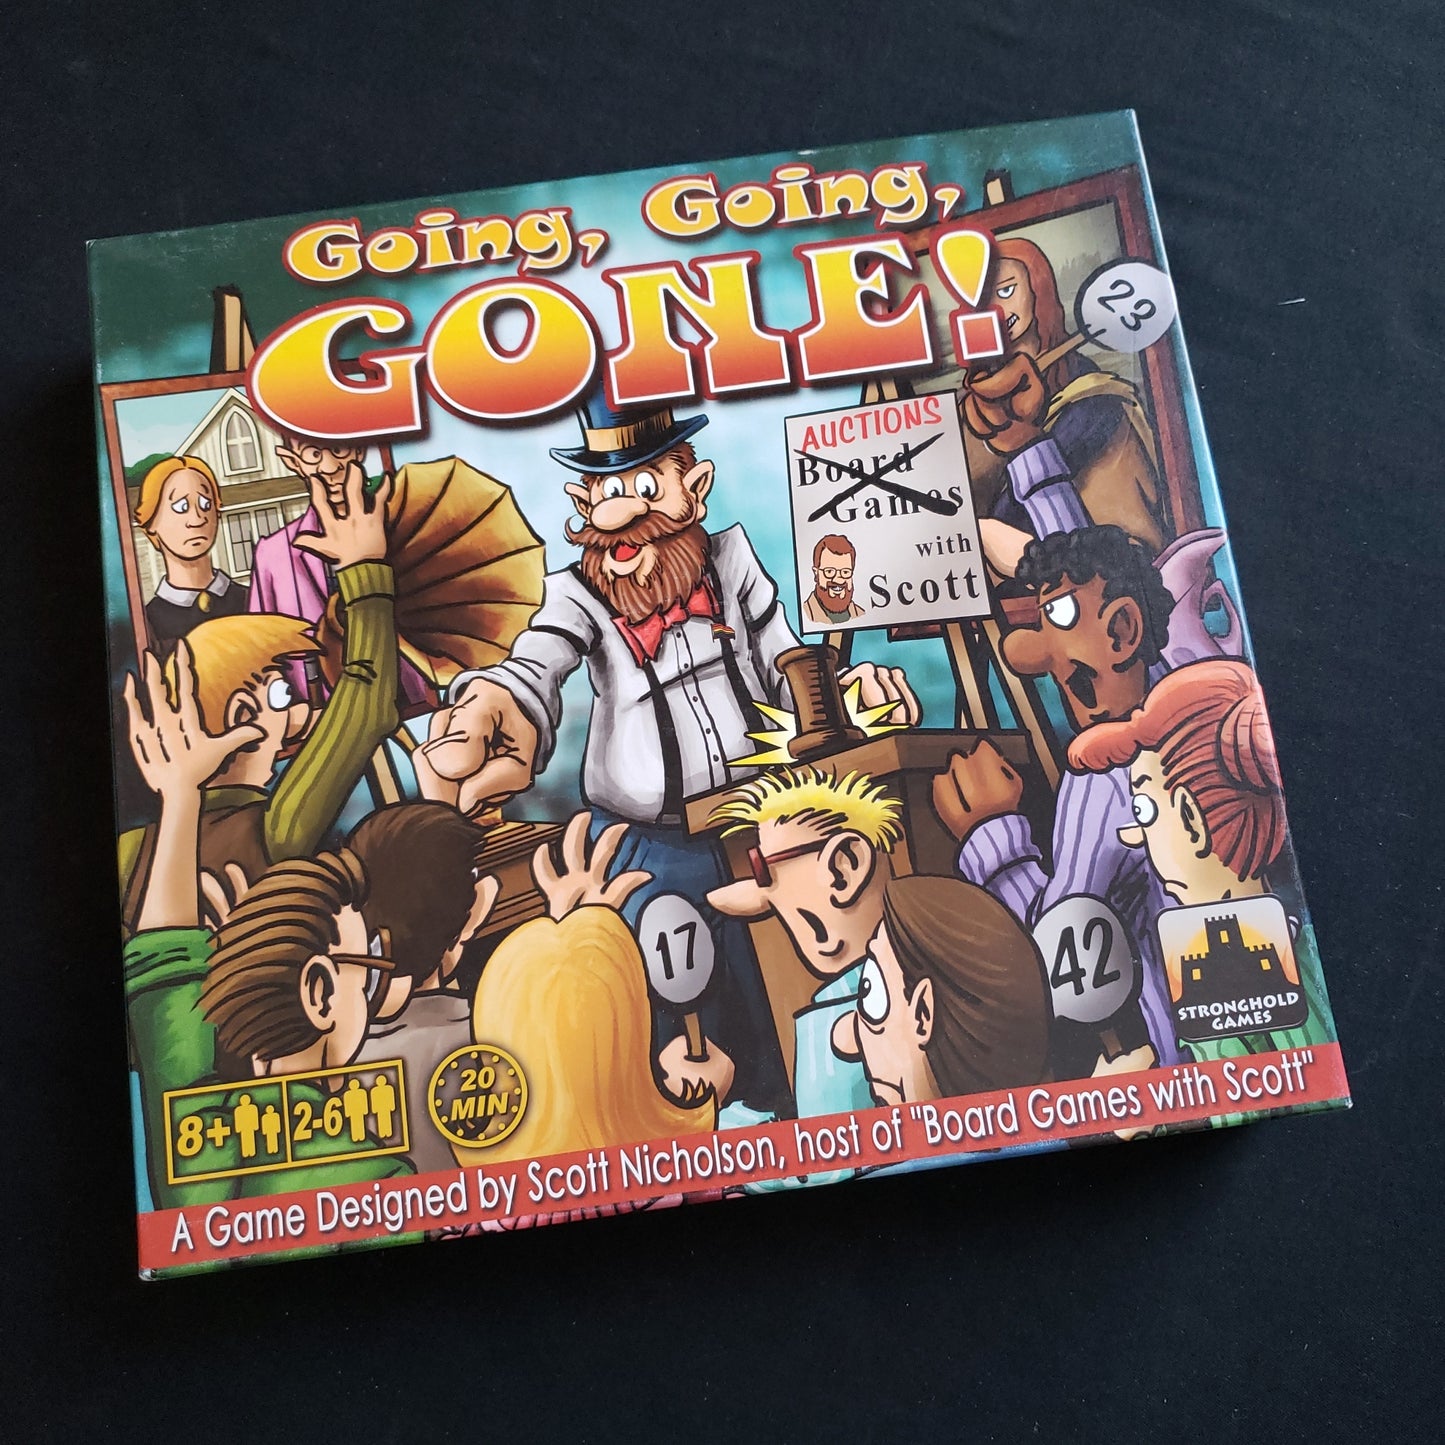 Image shows the front cover of the box of the Going, Going, GONE! board game